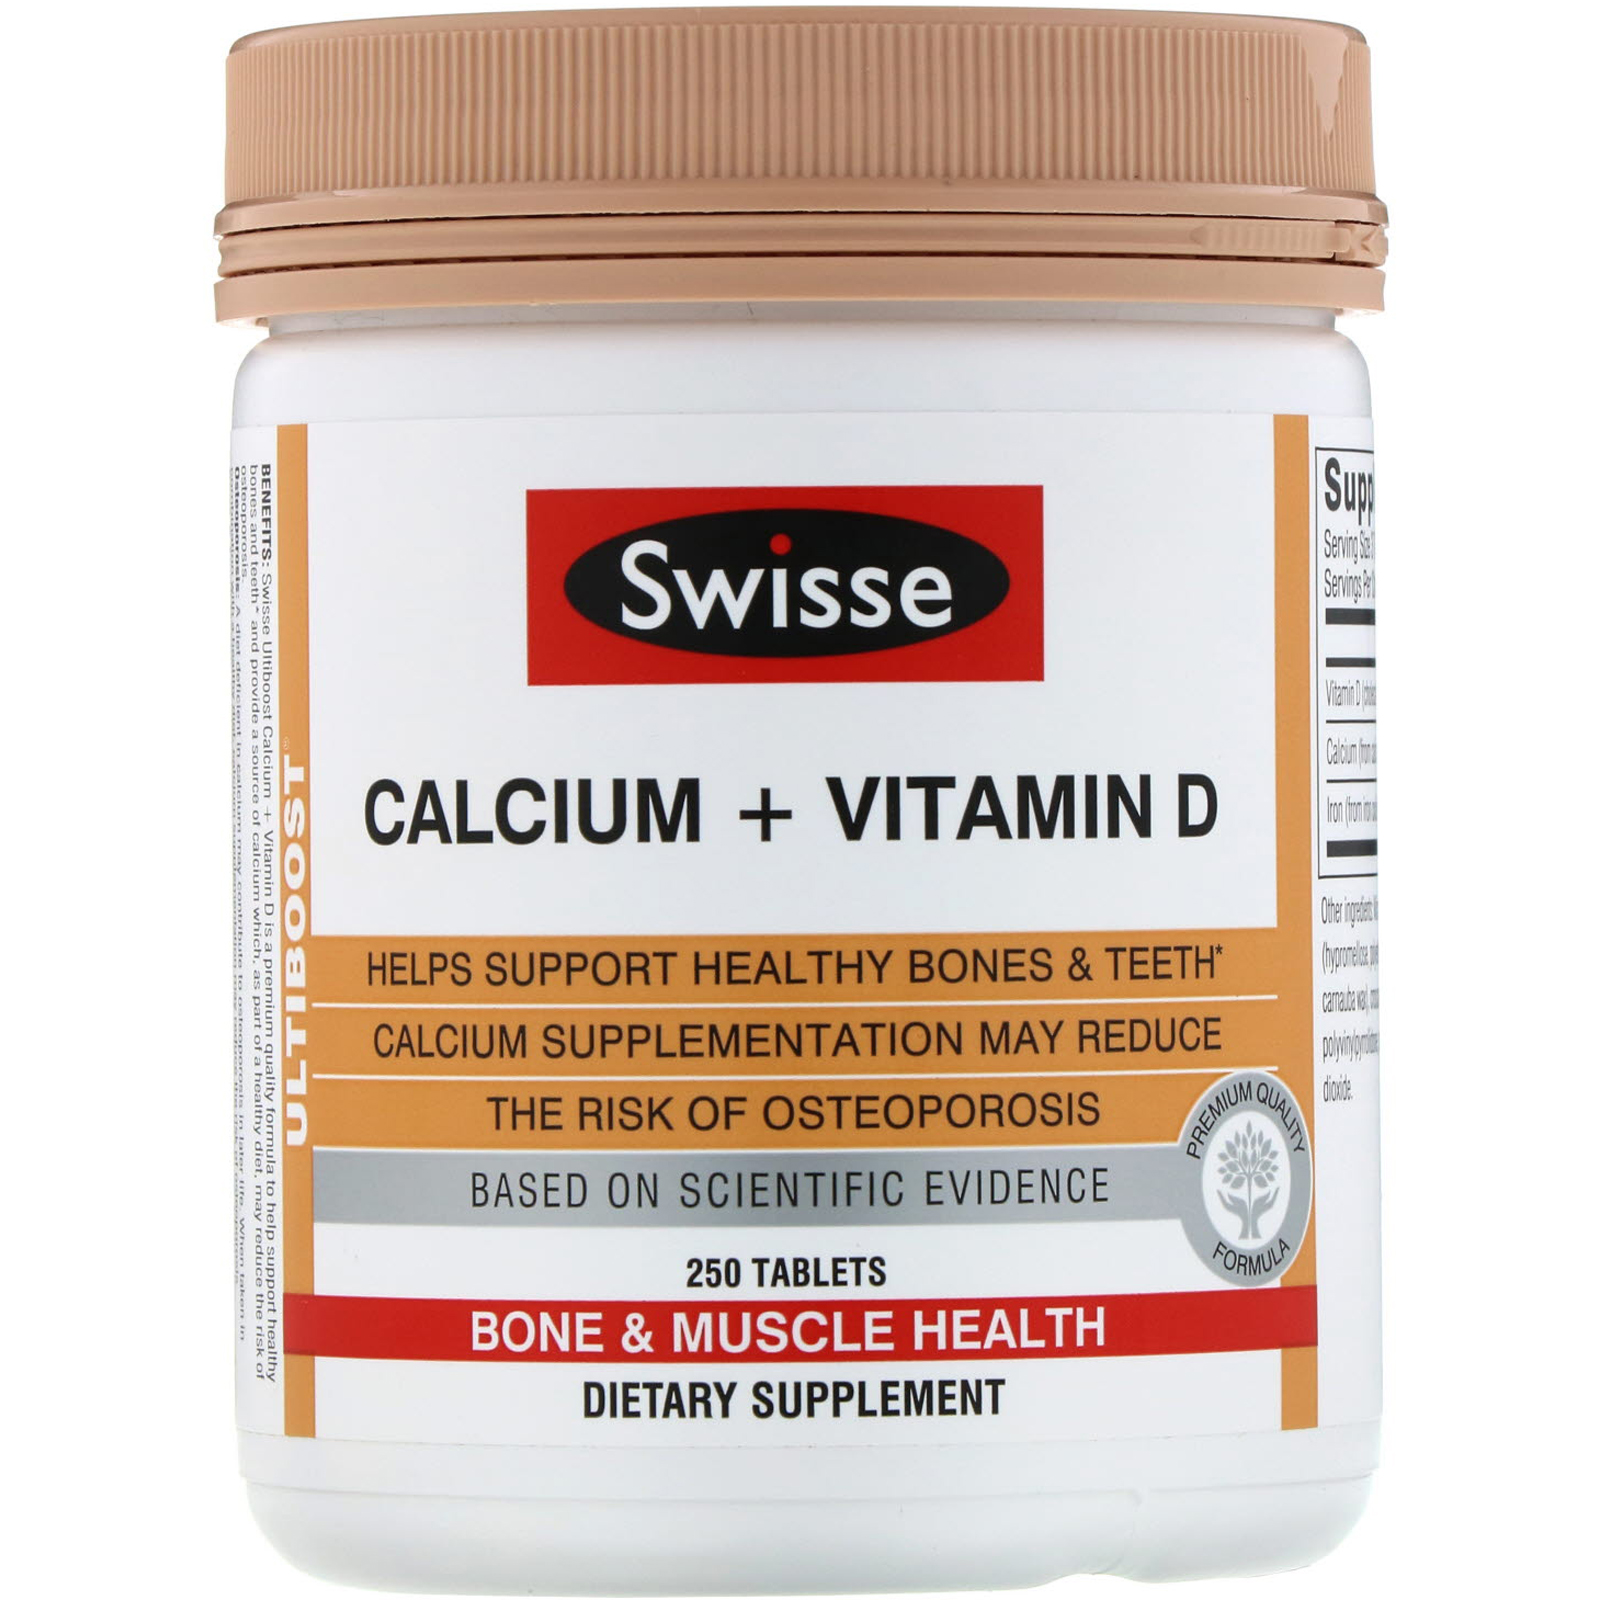 Details About Ultiboost Calcium Vitamin D 250 Tablets